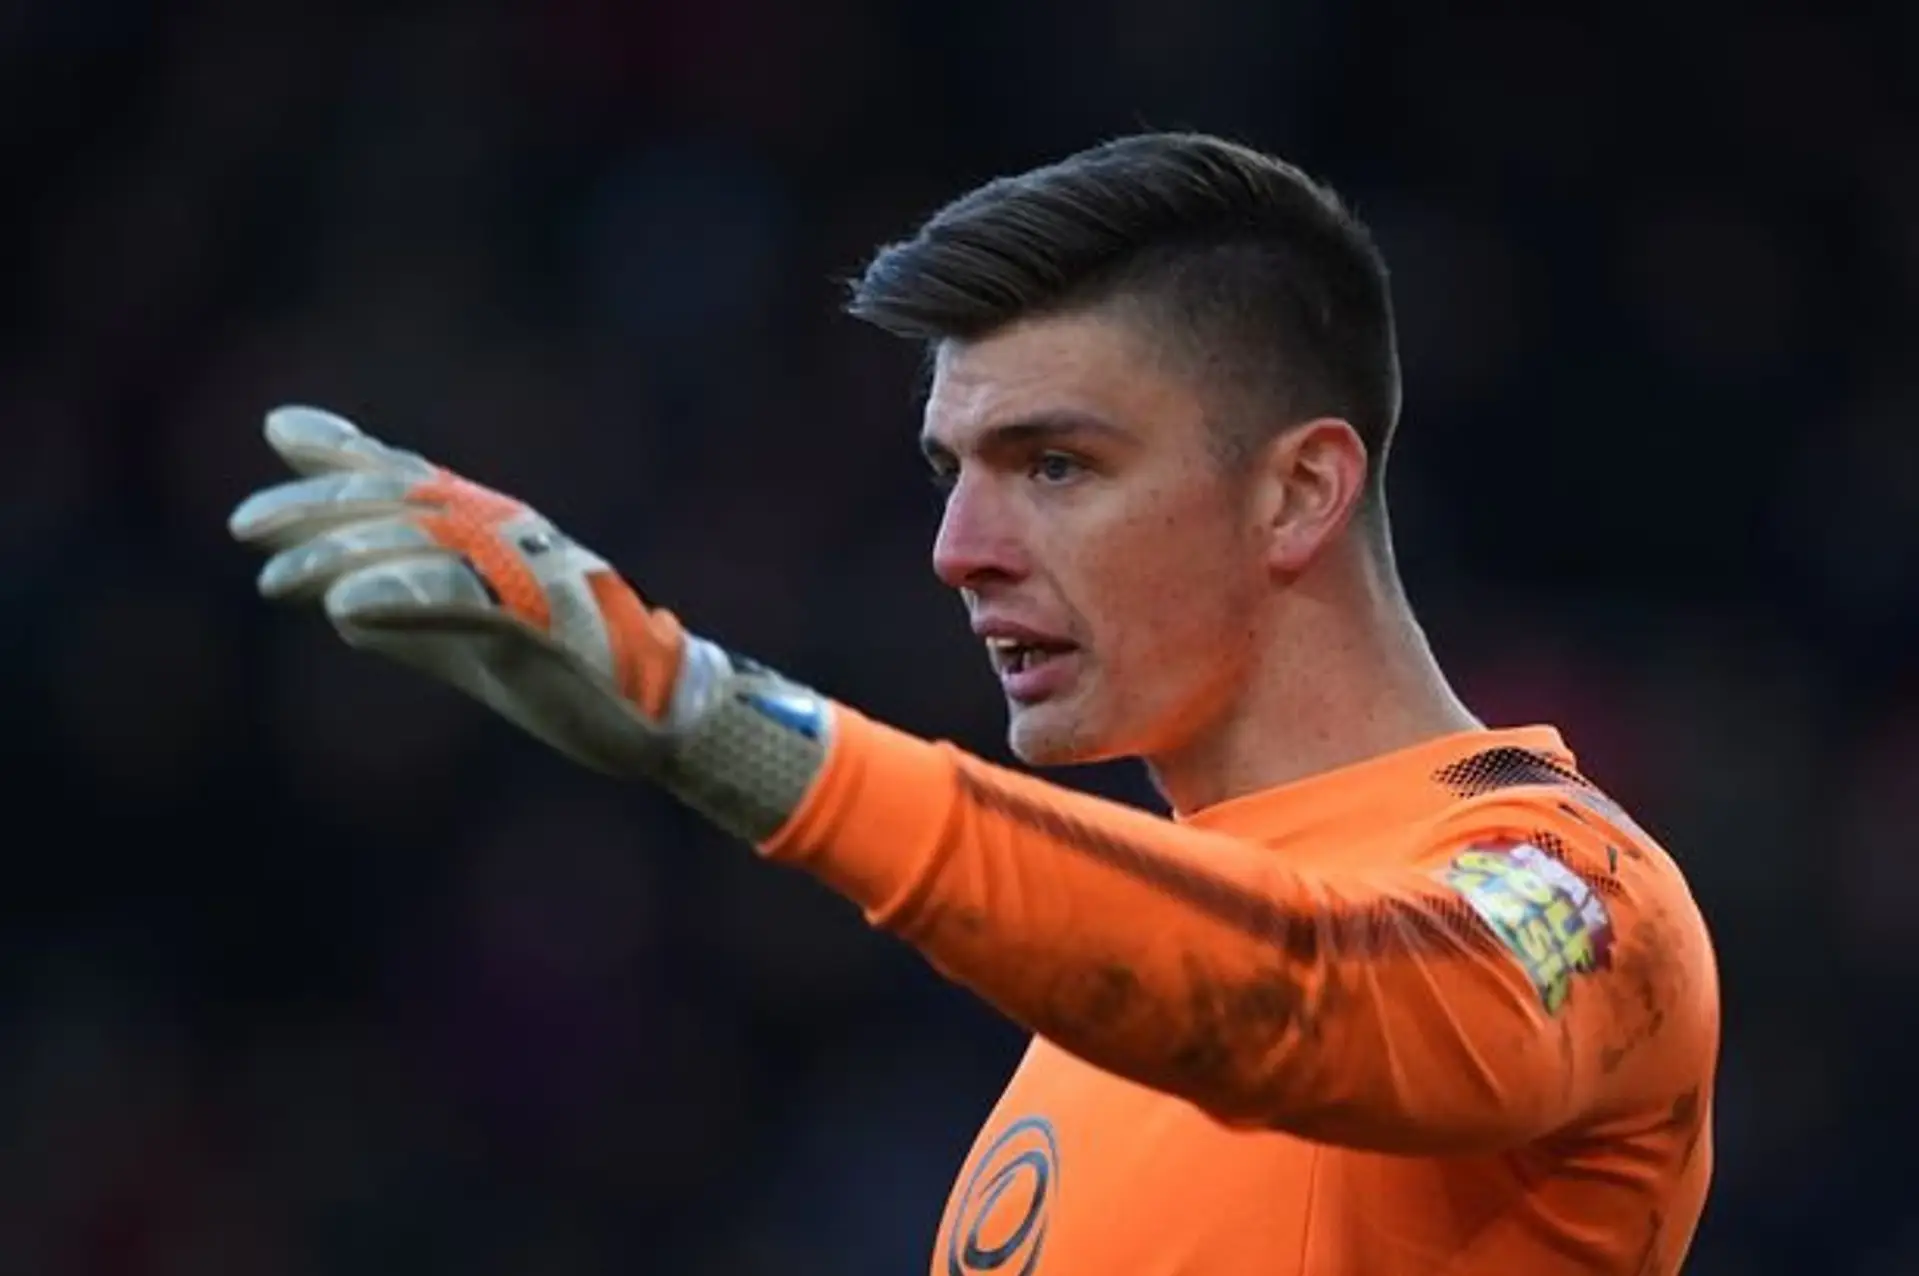 Chelsea Should be Thinking of Nick Pope or any Other Top PL Goalkeeper Instead of Going Abroad Again